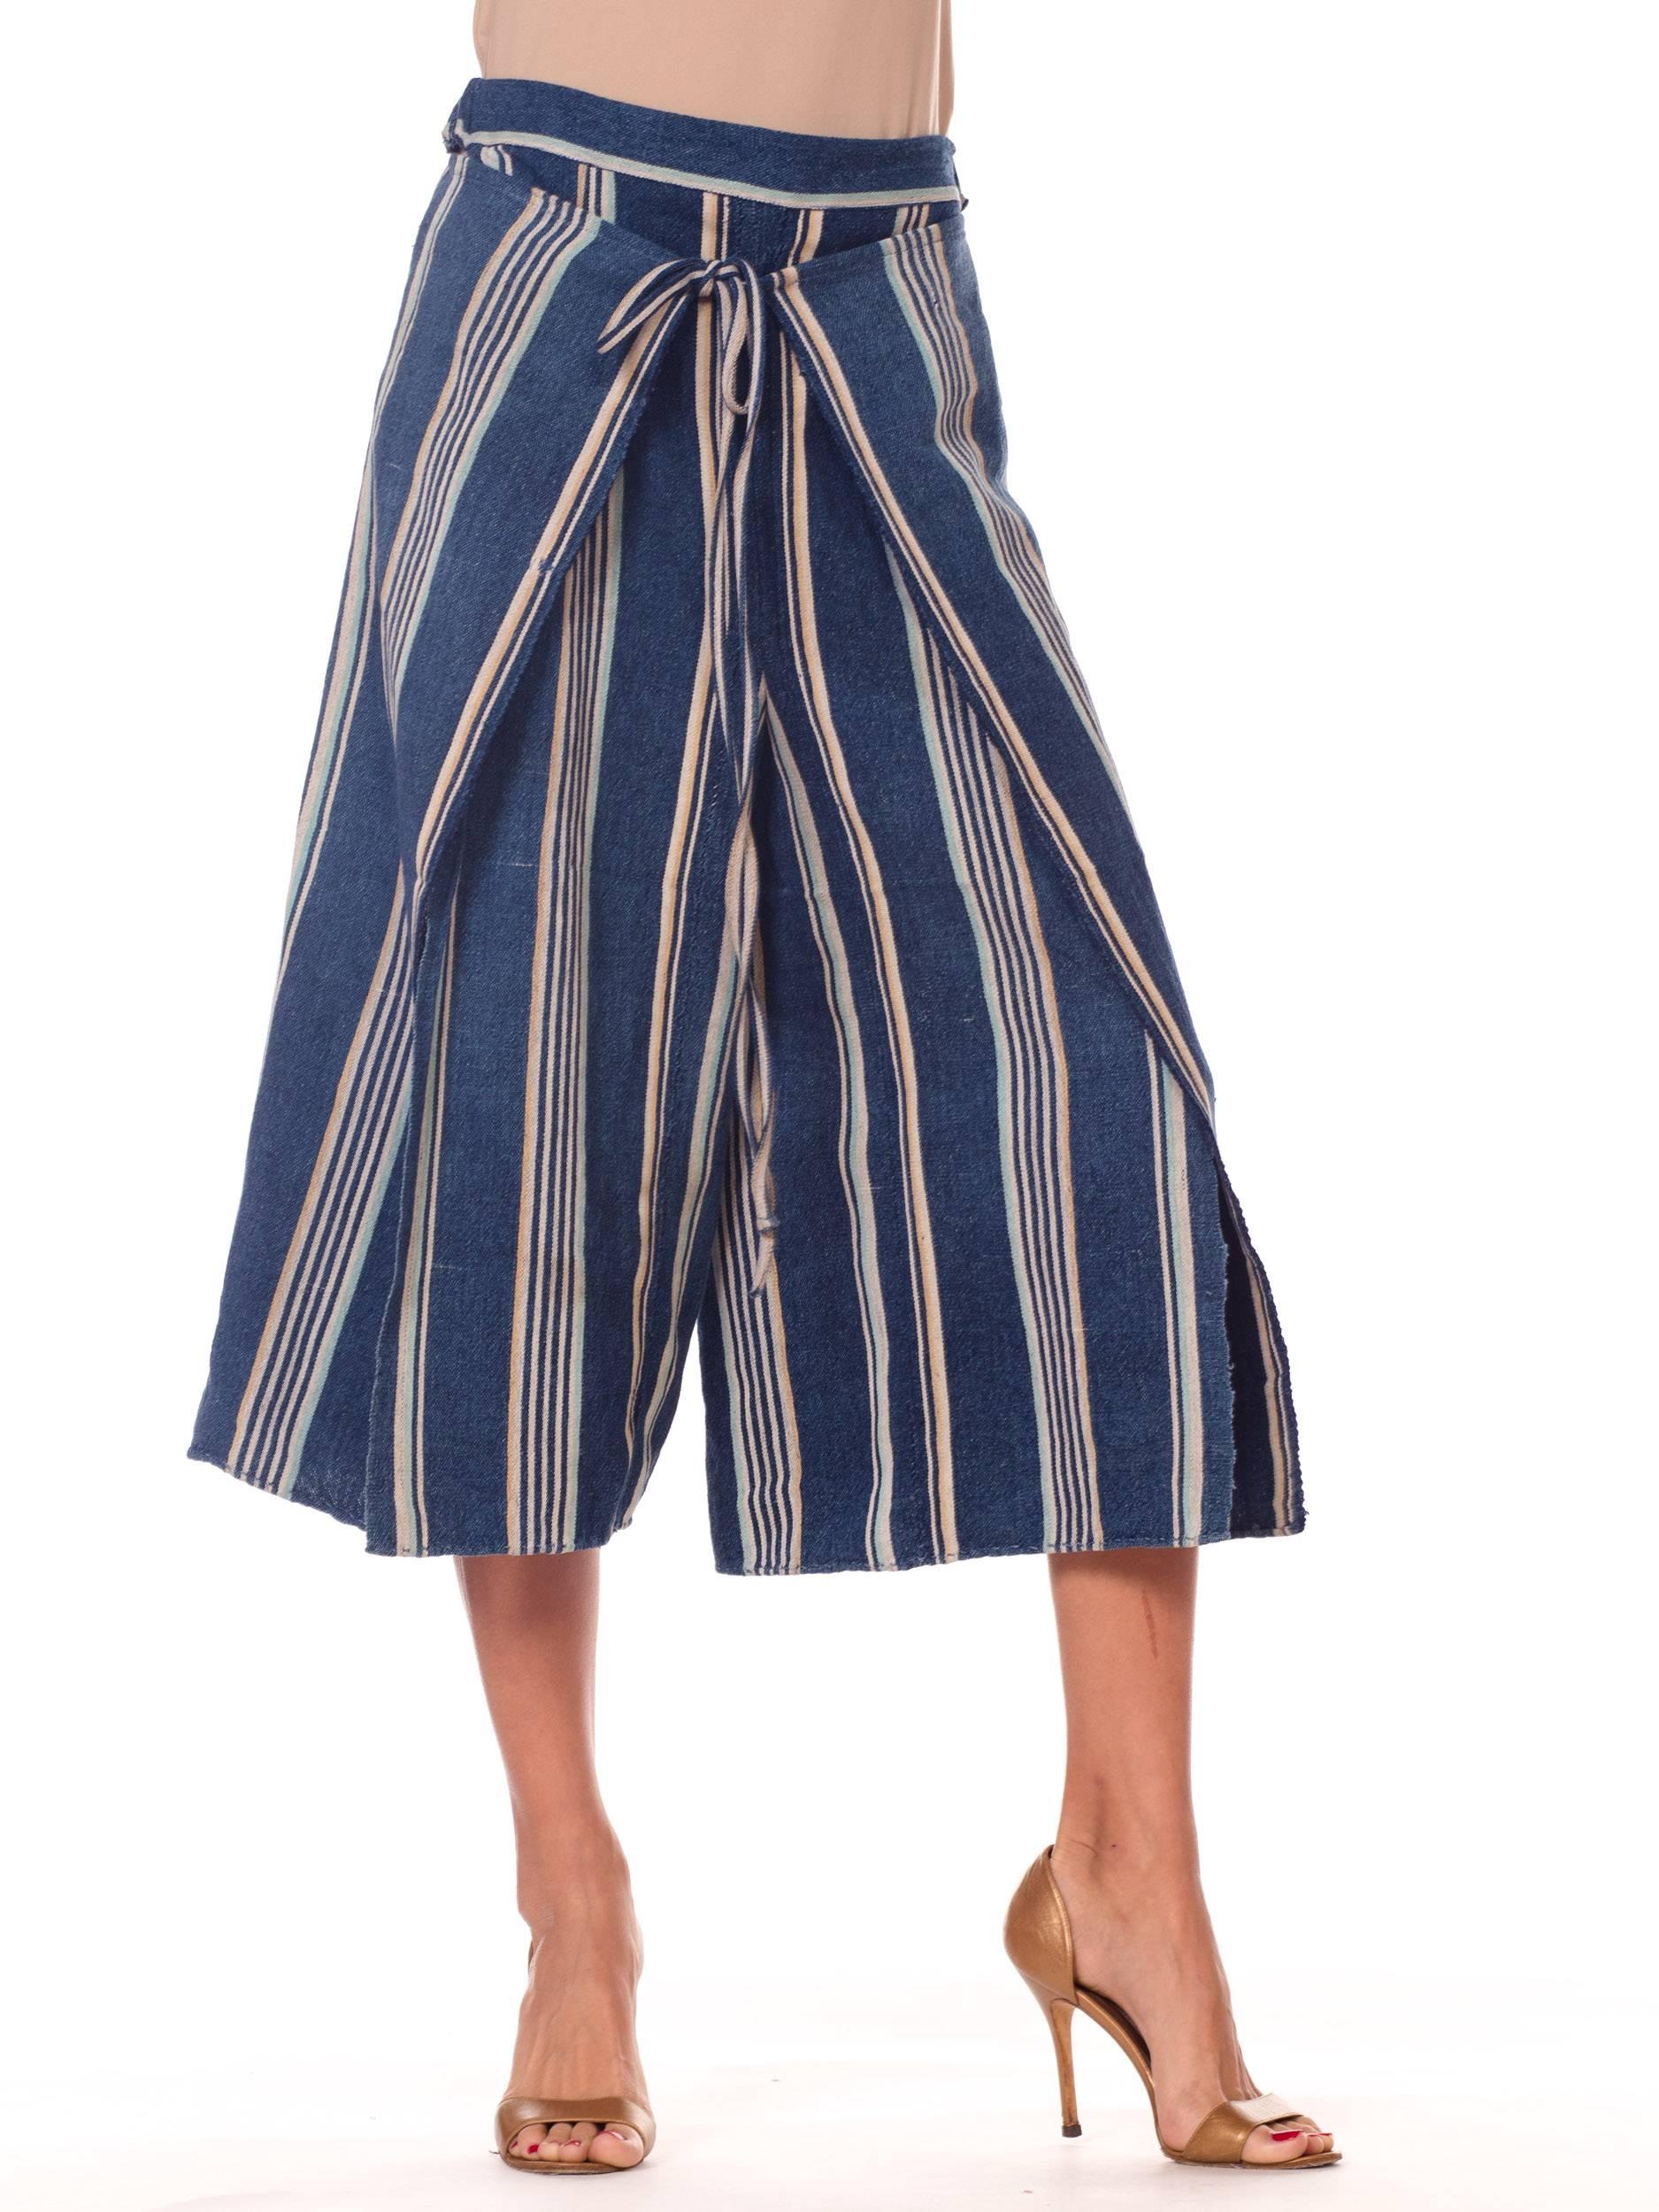 Blue and White Striped Handwoven African Indigo Wrap Pants
Thai pants with elastic in waist band